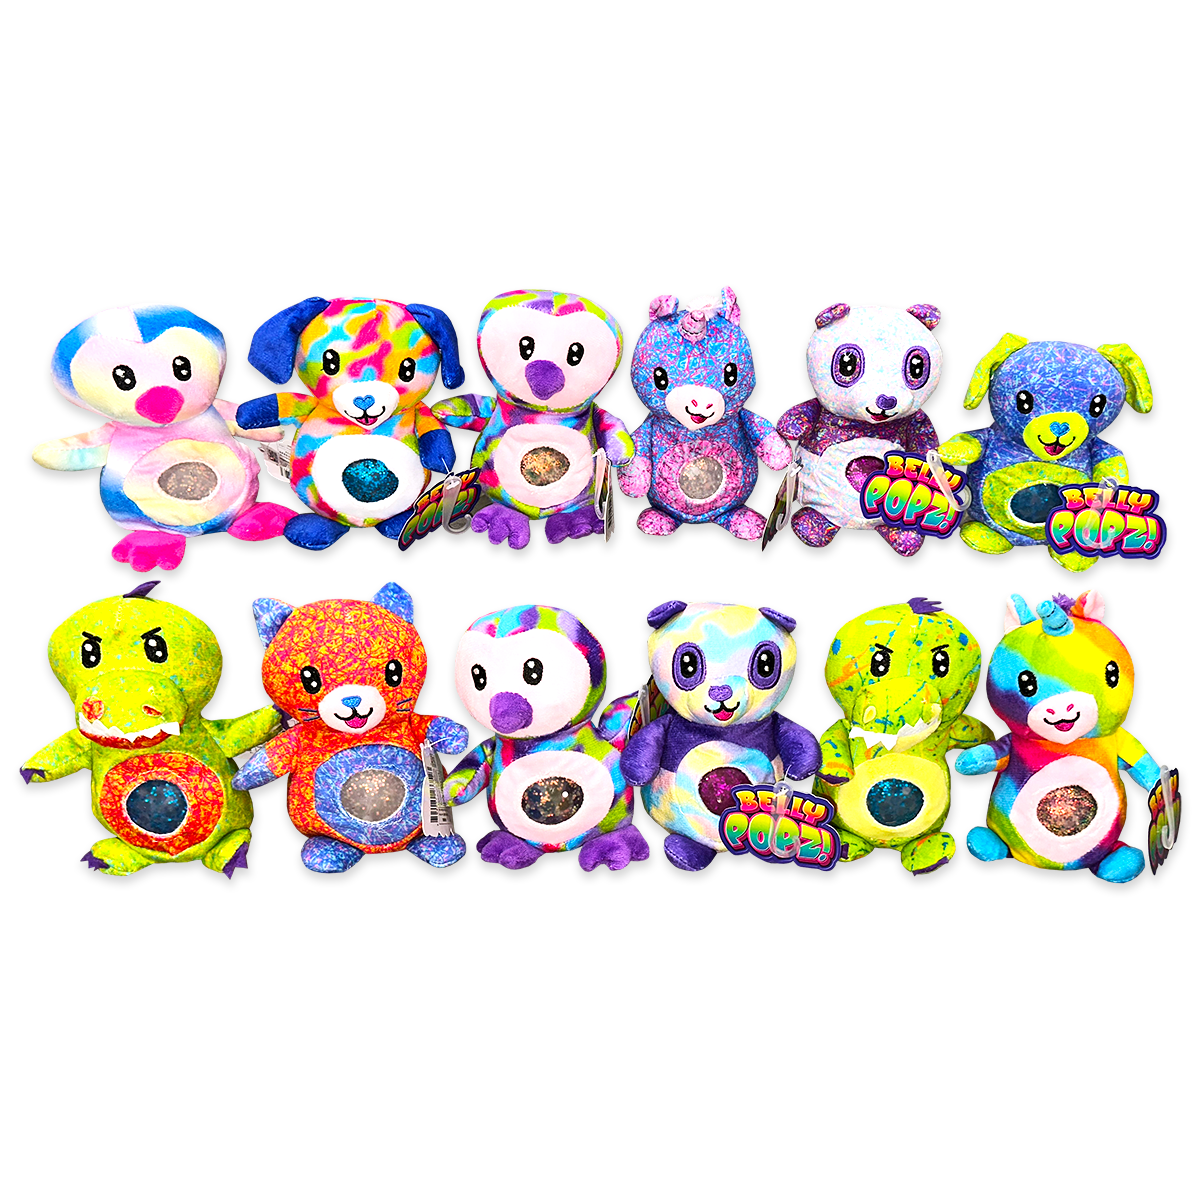 ITEM NUMBER 023752L BELLY POPZ PLUSH TOY - STORE SURPLUS NO DISPLAY - 12 PIECES PER PACK